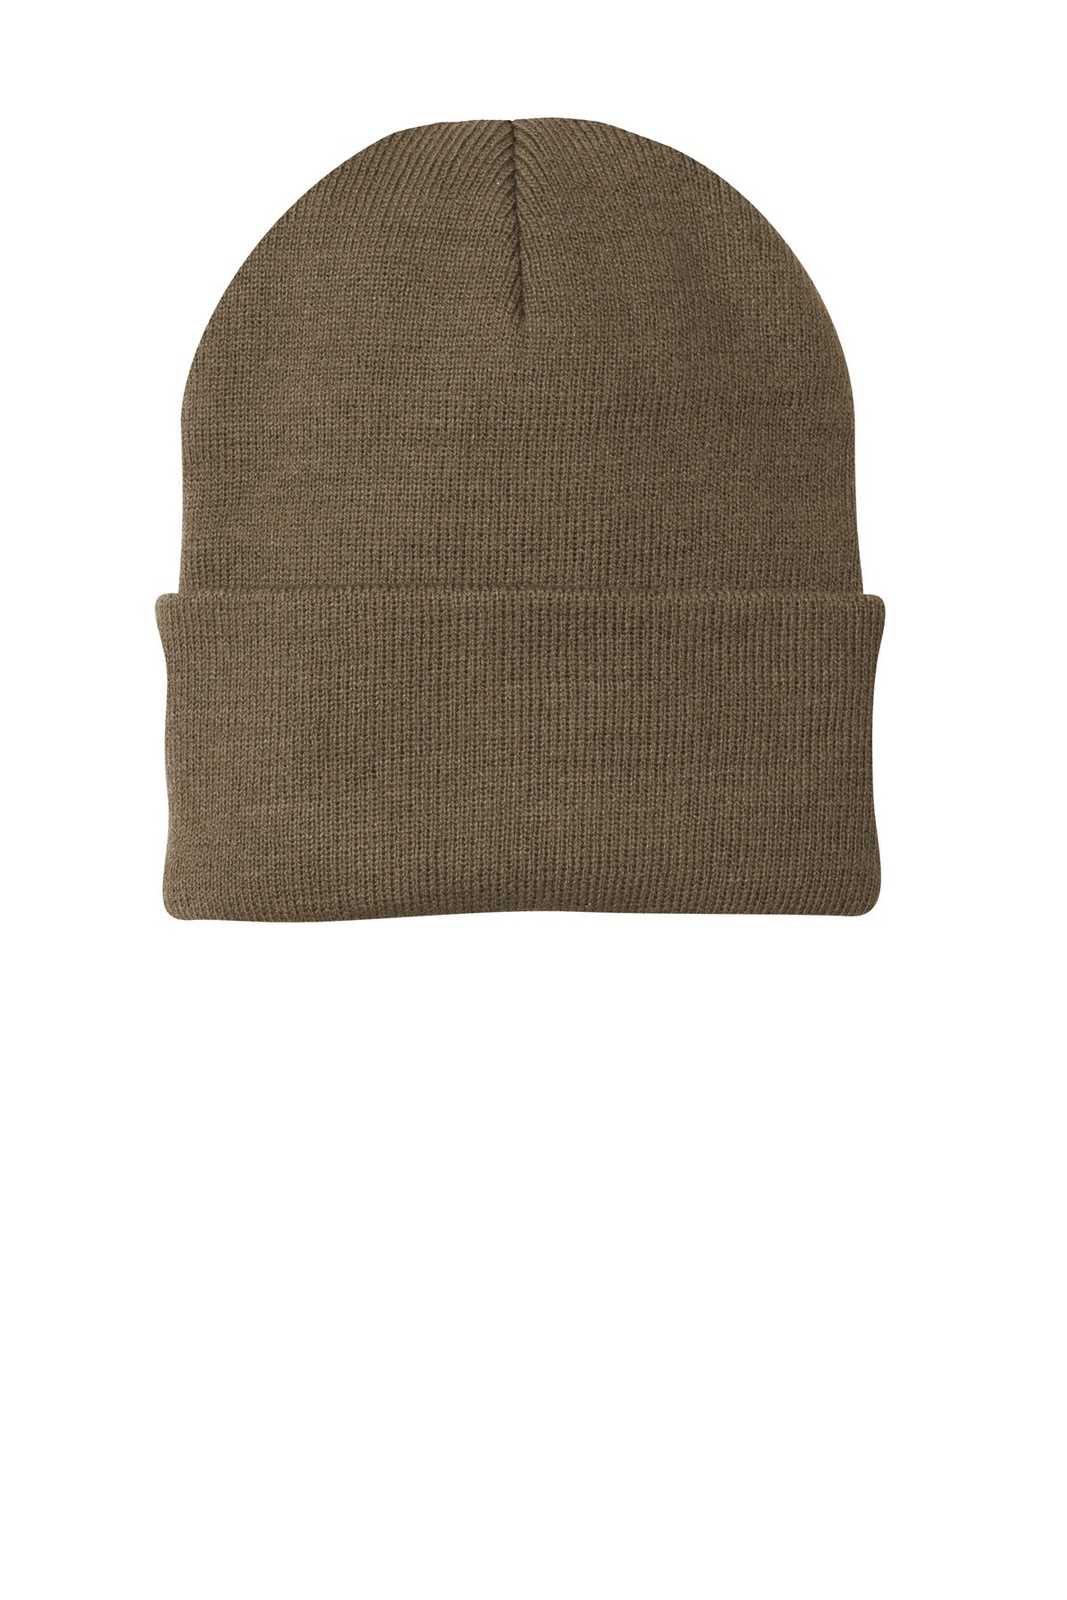 Port & Company CP90 Knit Cap - Woodland Brown - HIT a Double - 1